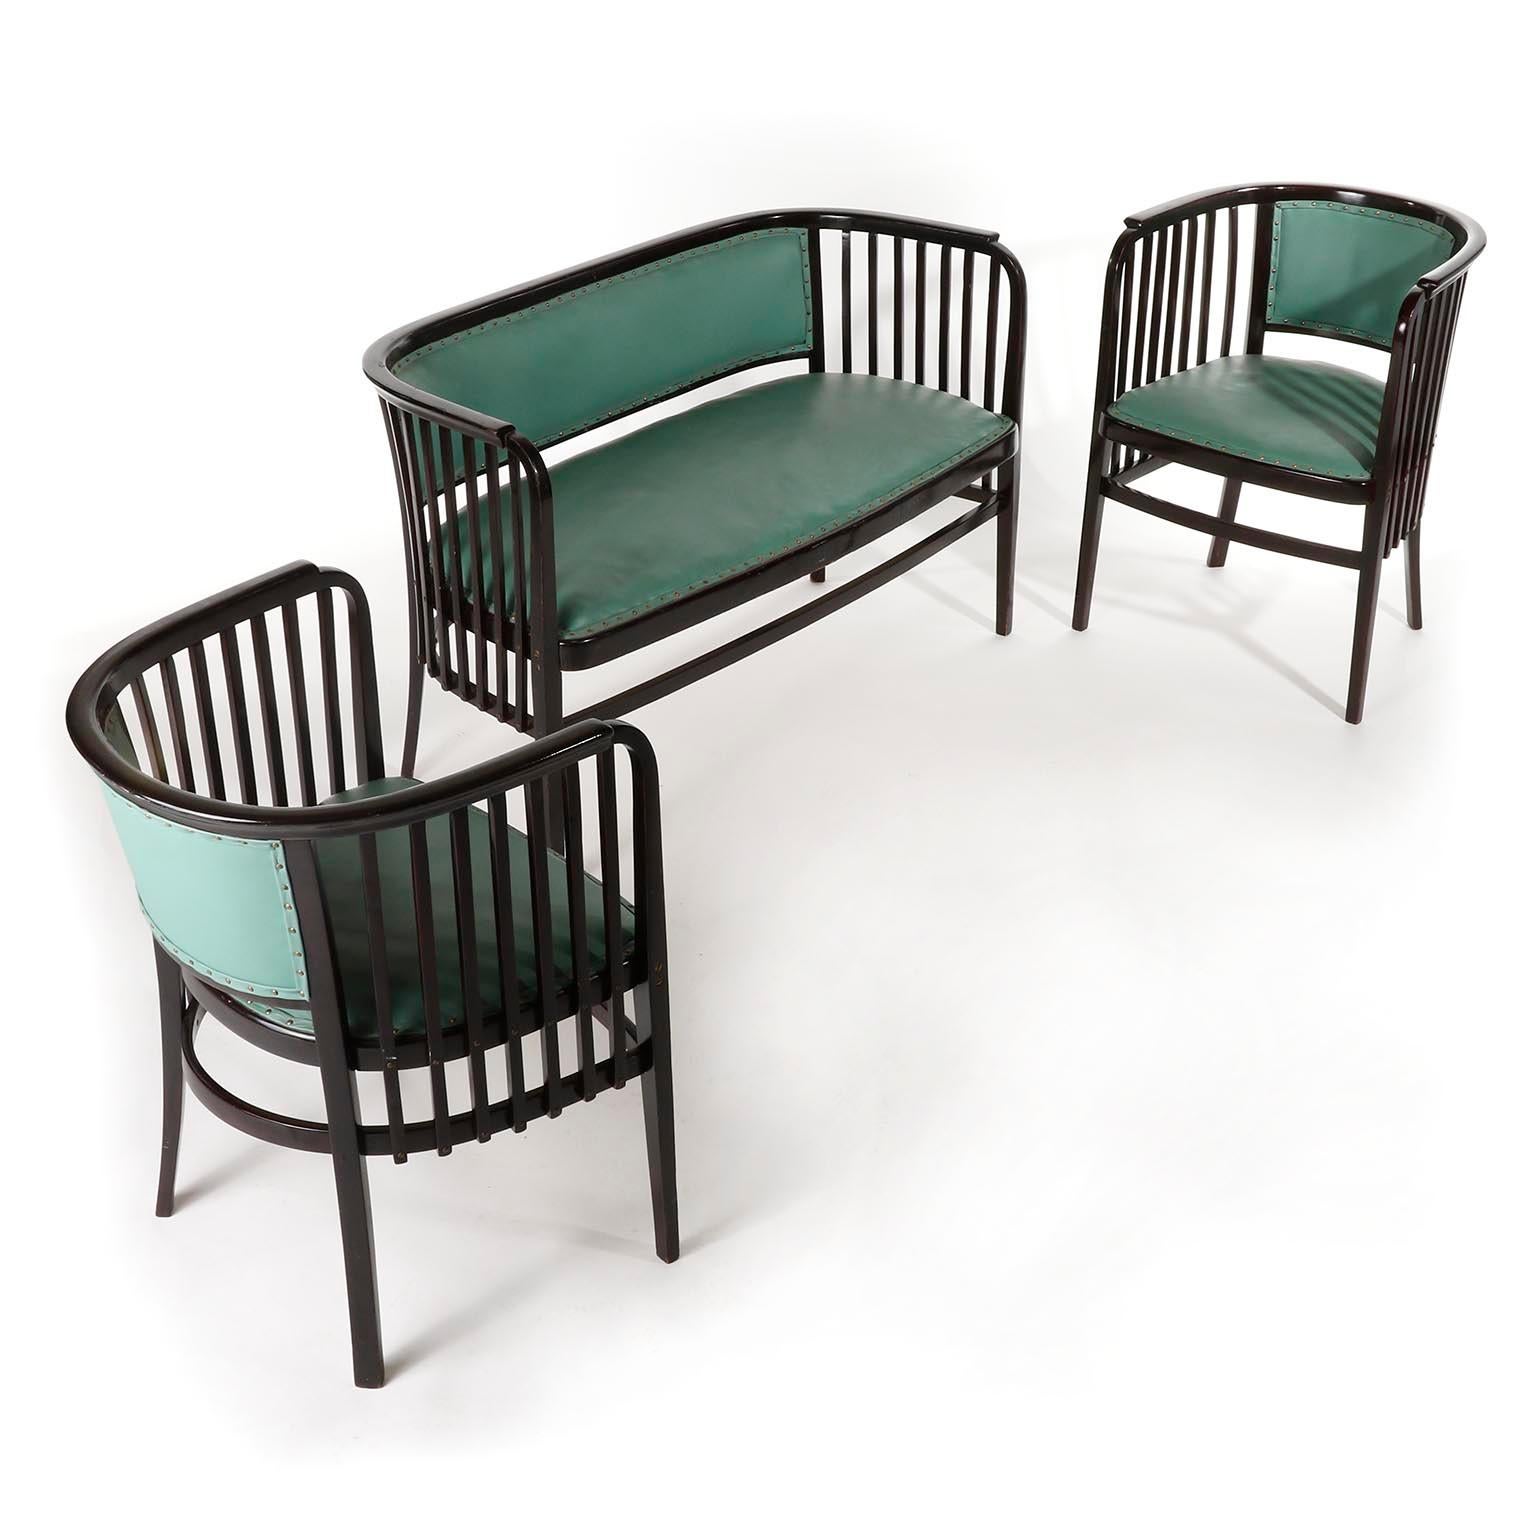 Beech Pair of Armchairs Chairs Marcel Kammerer, Thonet, Turquoise Green Leather, 1910 For Sale